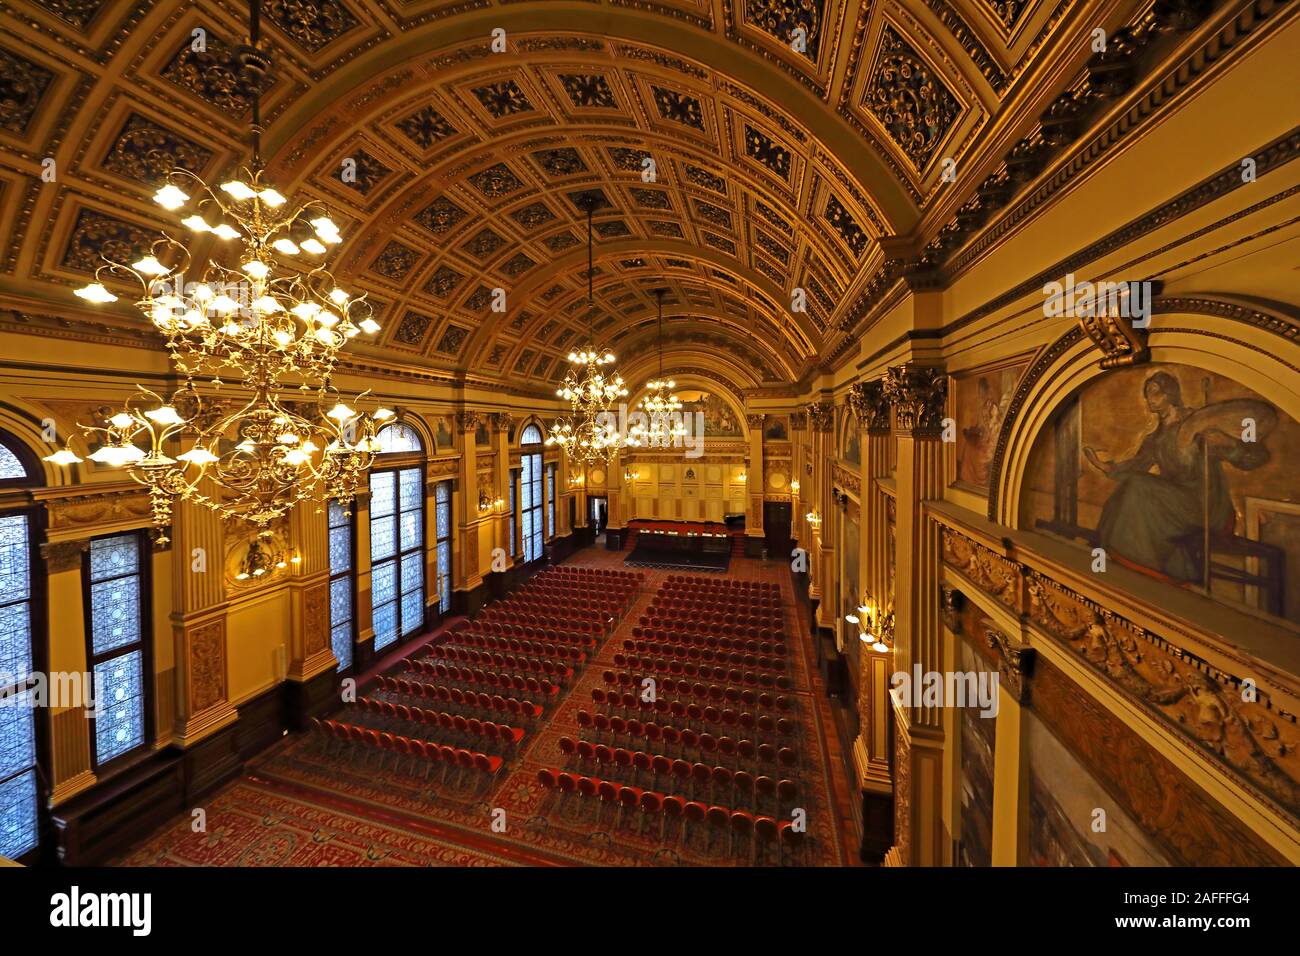 The Banqueting Hall, Glasgow City Chambers, Town Hall, George Square, Strathclyde, Scotland, UK, G2 1DU Stockfoto